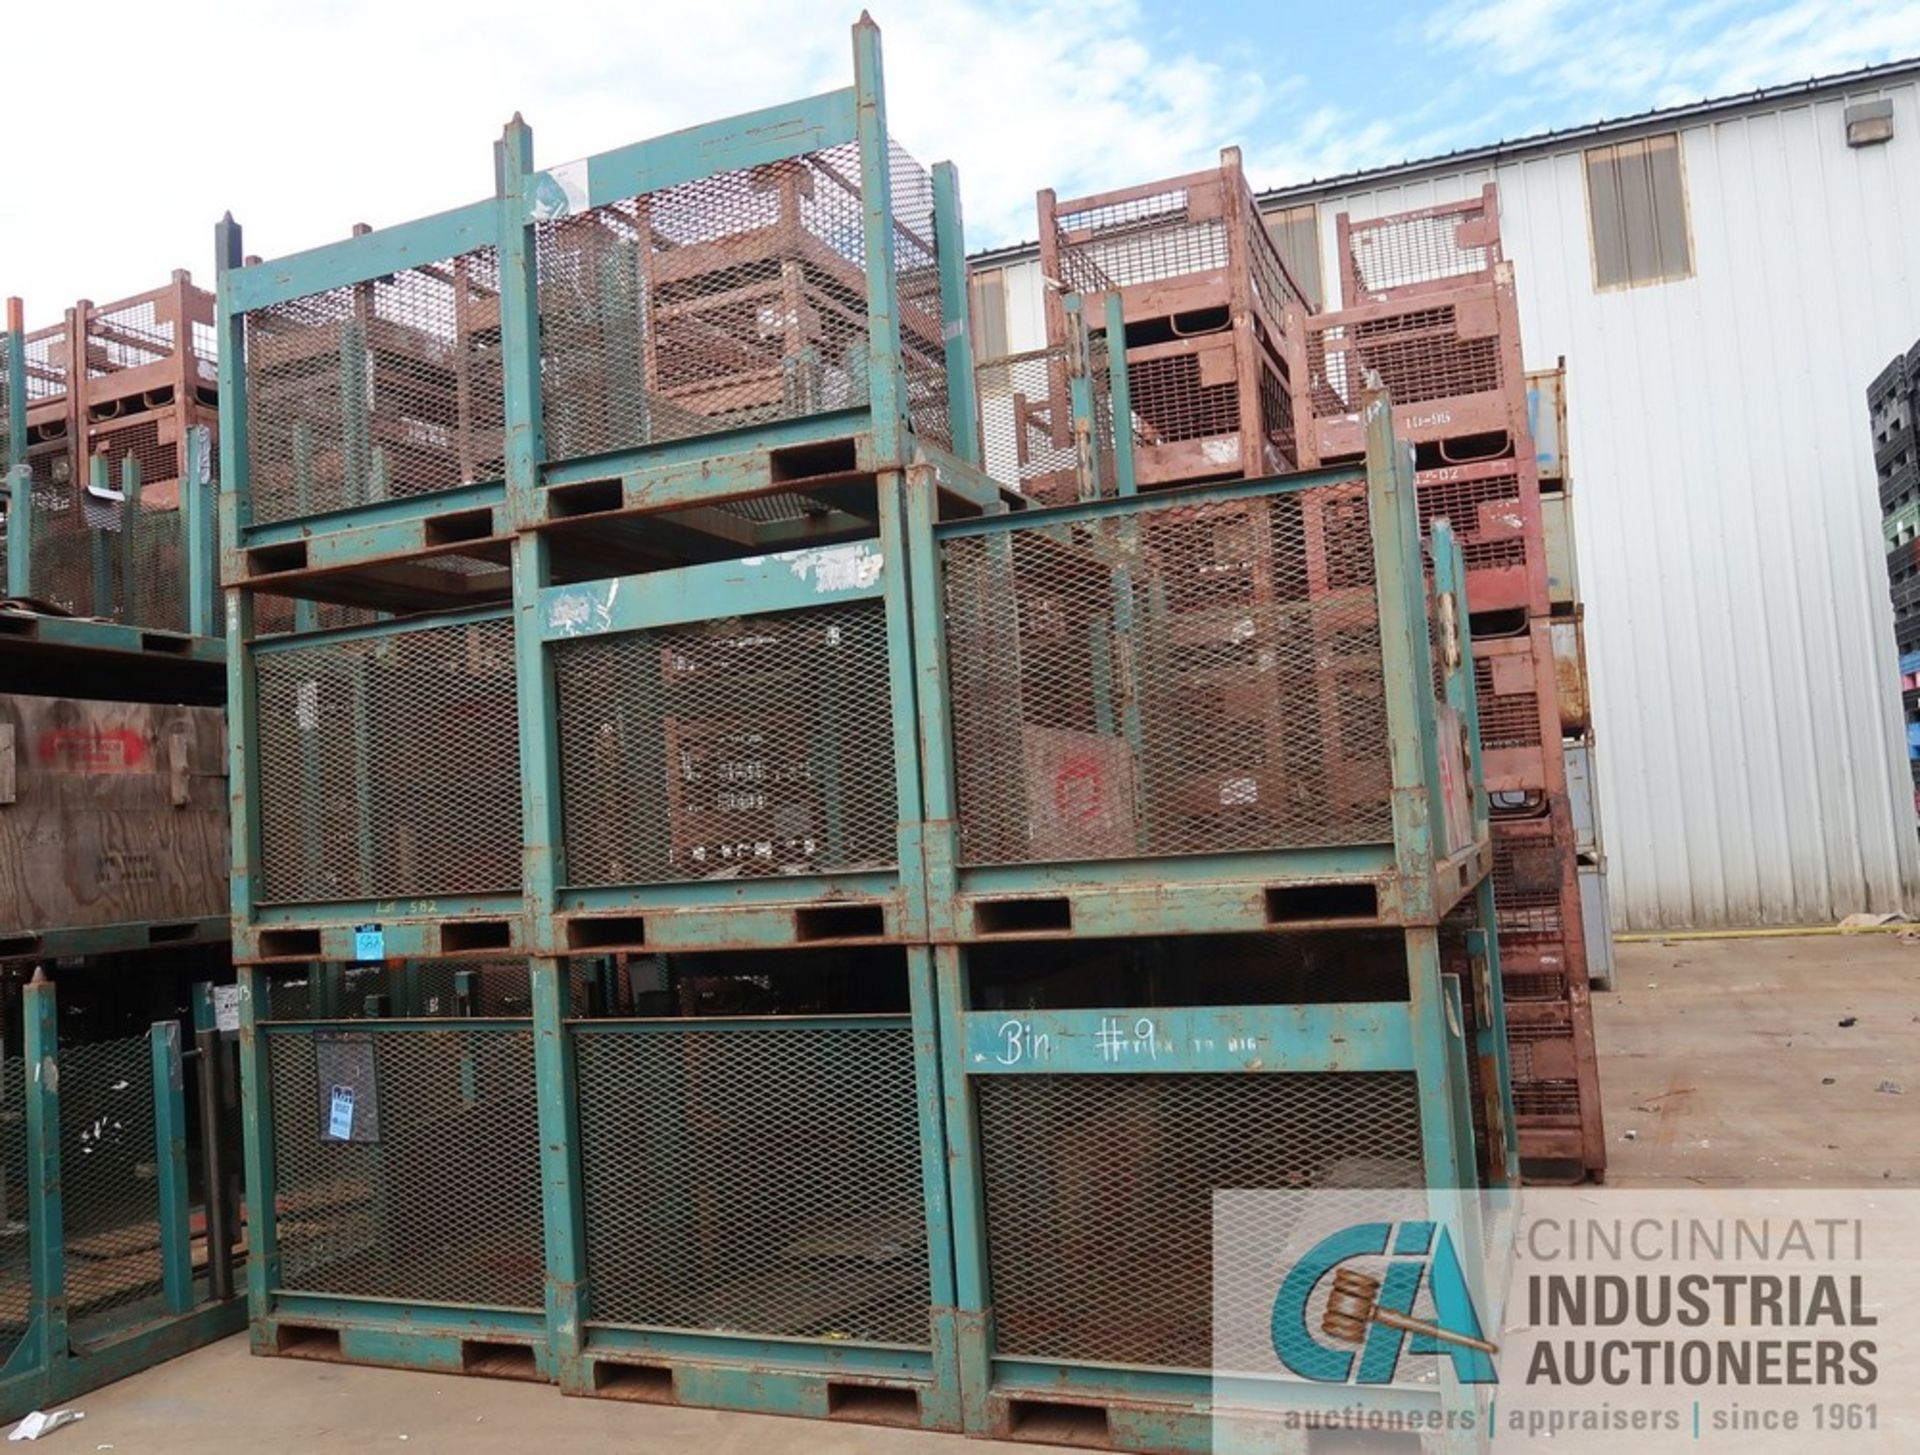 48" FRONT TO BACK X 16" LEFT TO RIGHT X 36" DEEP STACKABLE STEEL CONTAINERS